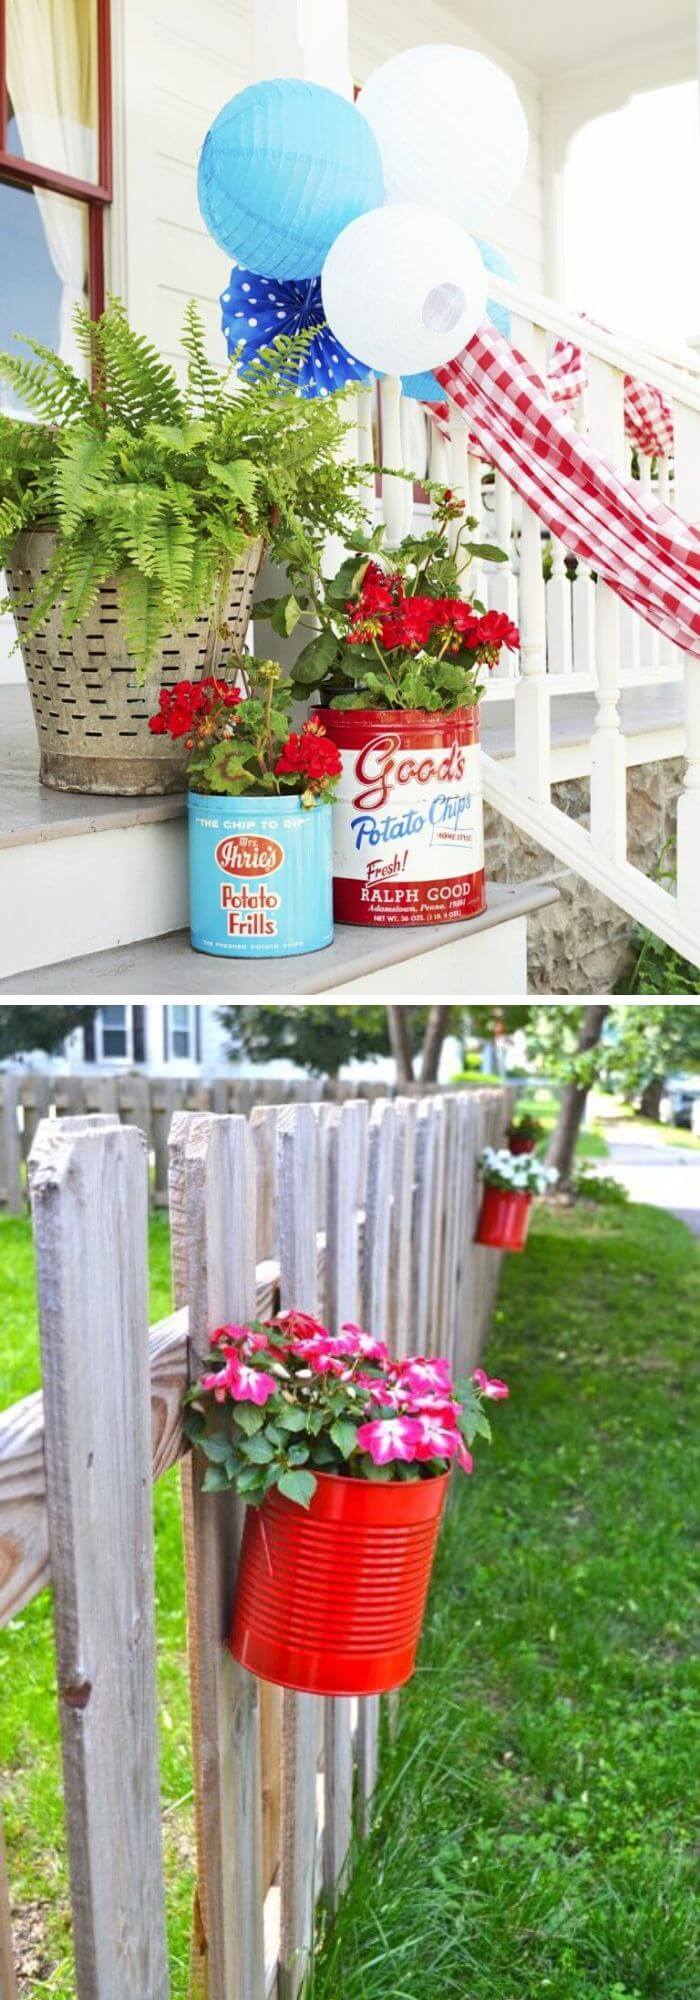 A Backyard with Recycled Vintage Tins